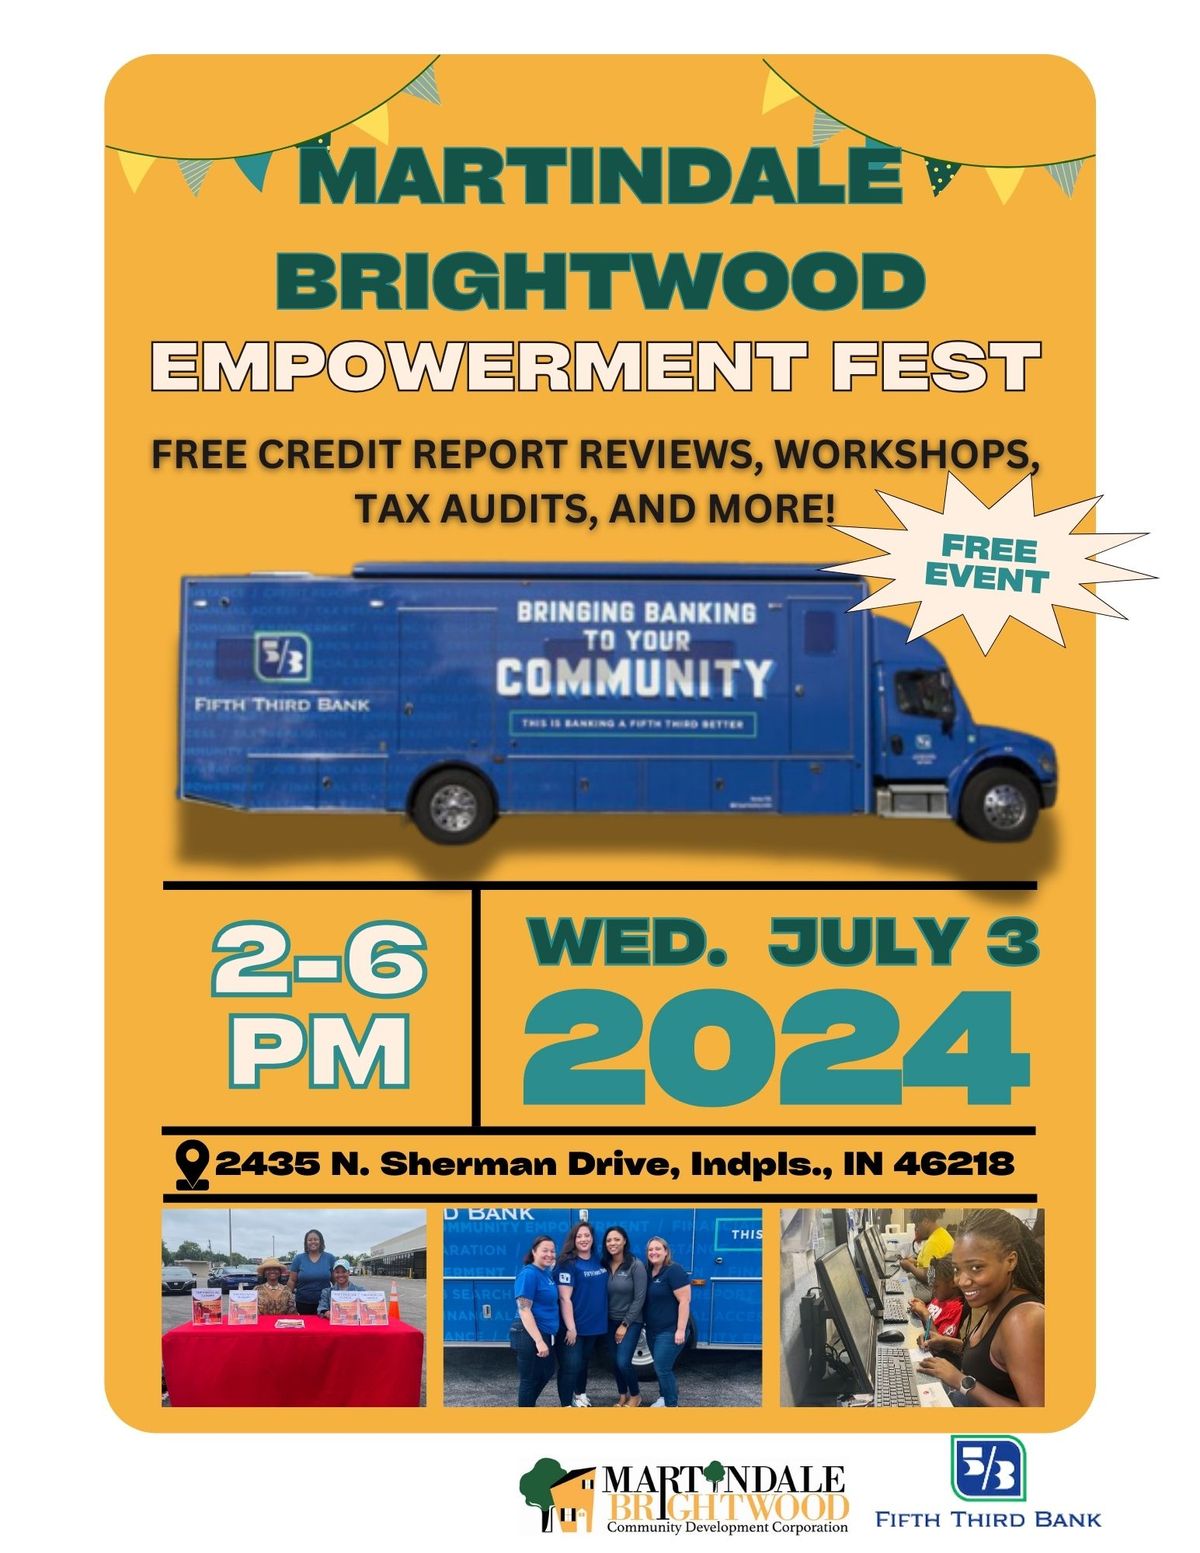 Martindale Brightwood Empowerment Fest